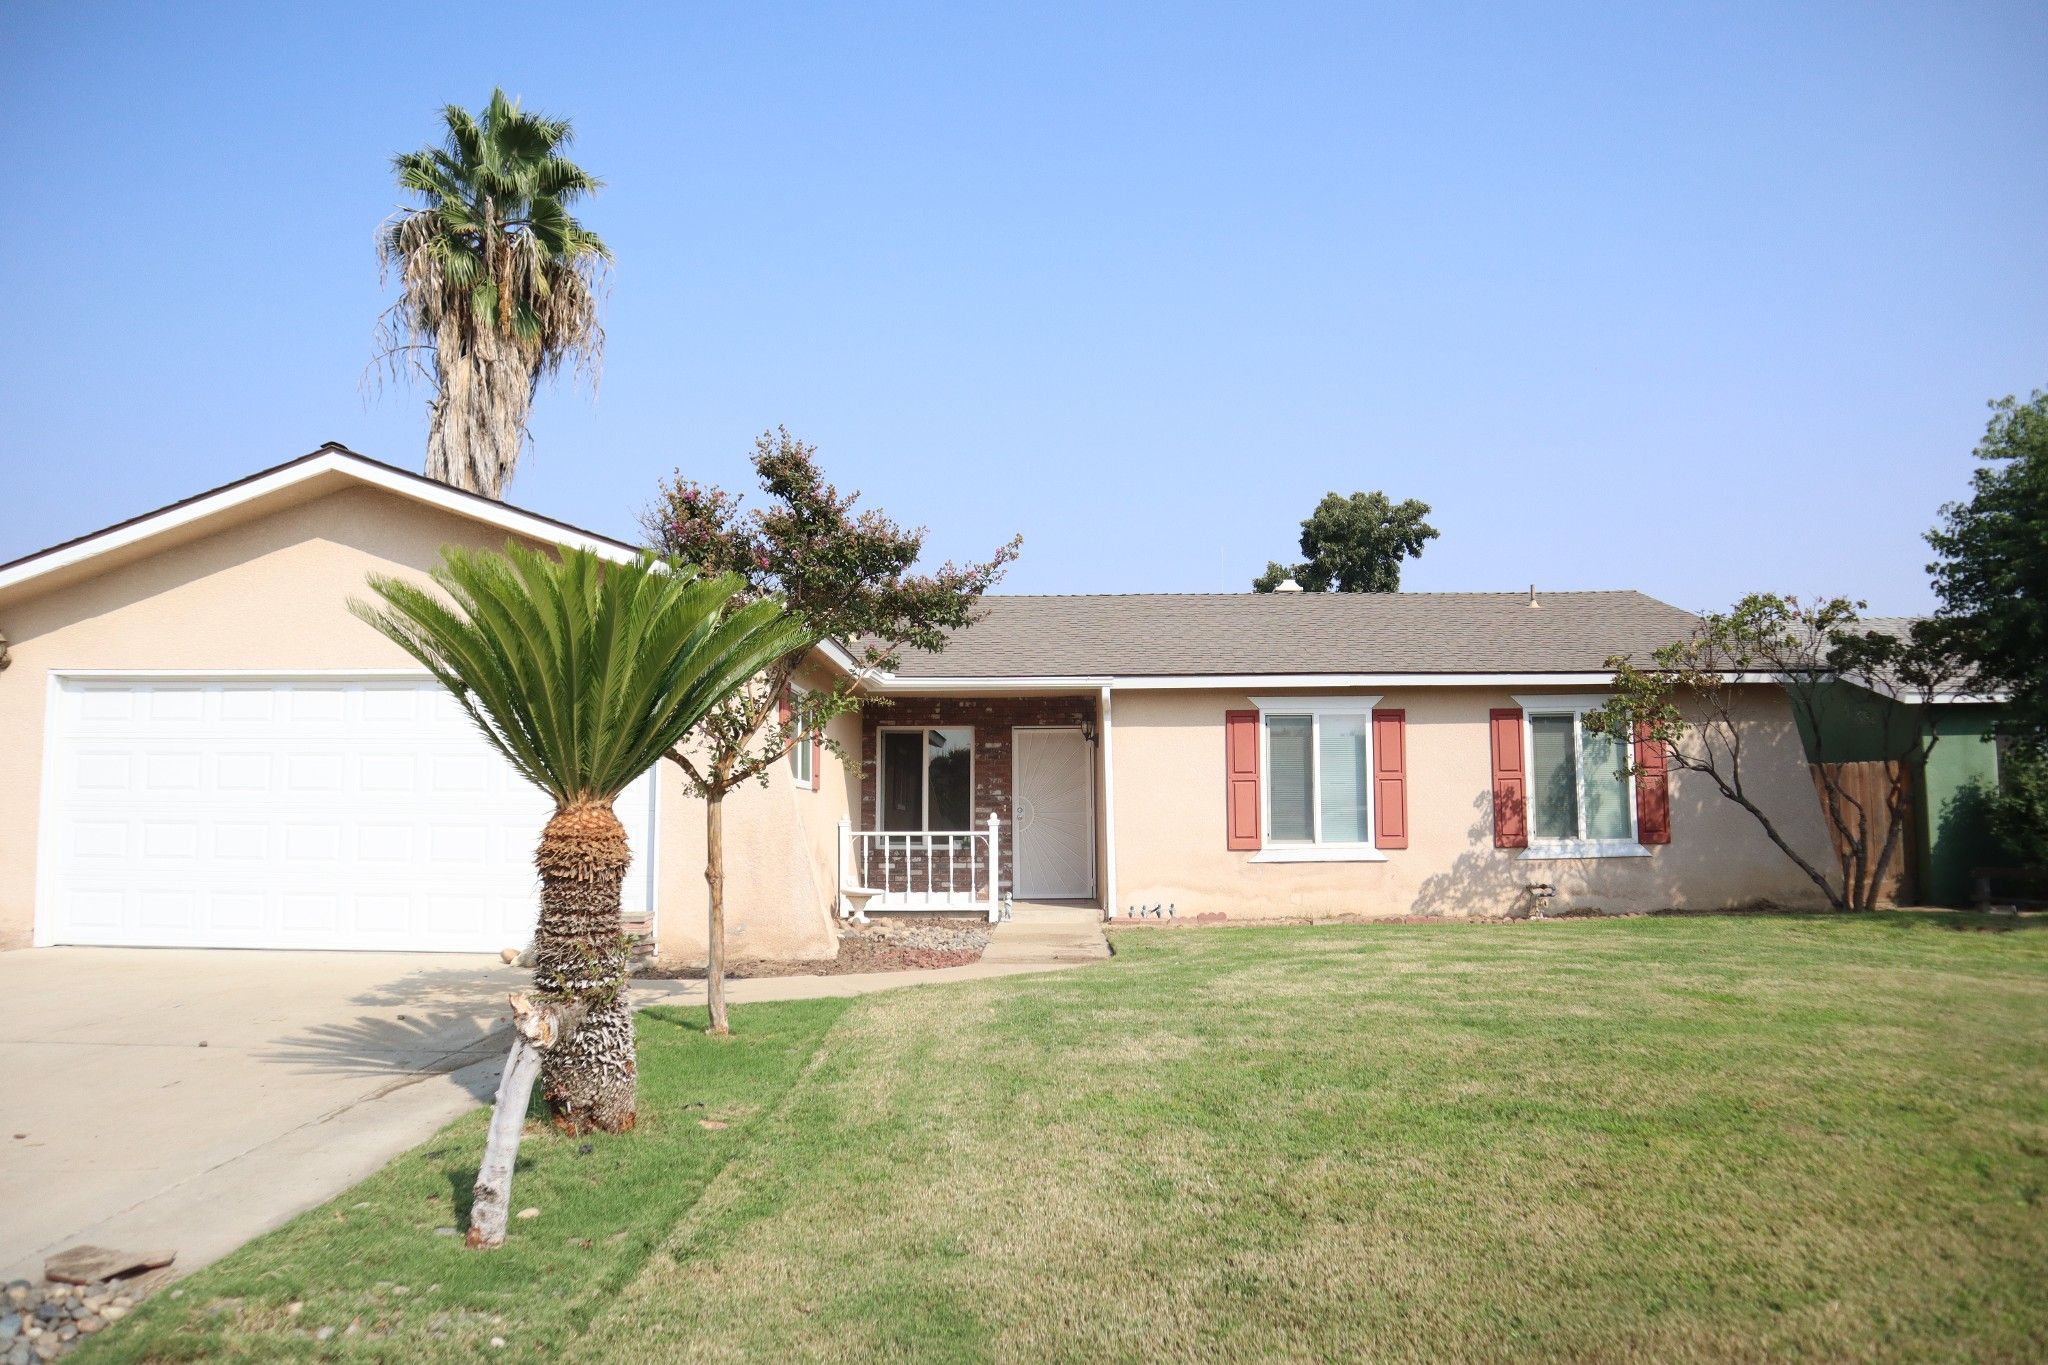 Main Photo: 2923 Claremont Avenue in clovis: Residential for sale : MLS®# 548281